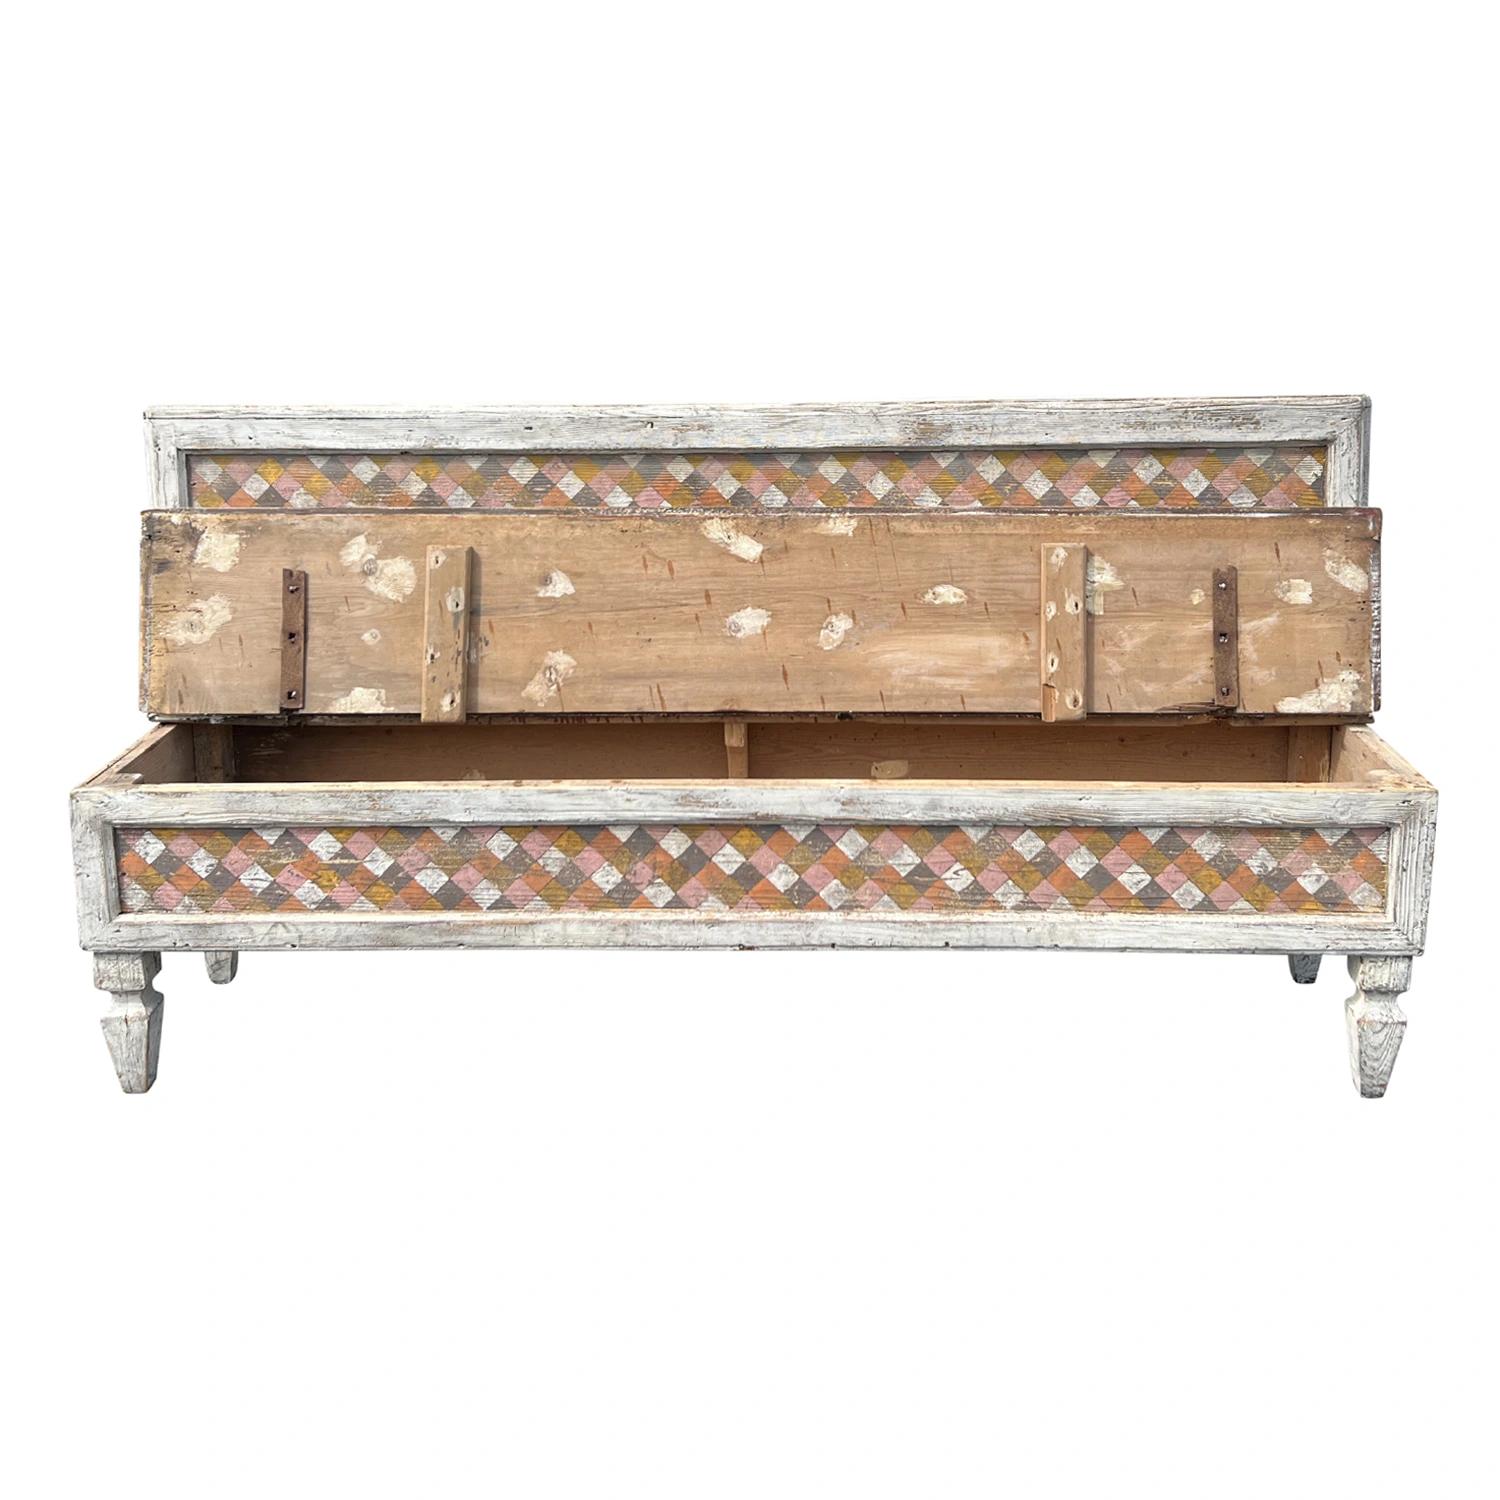 A 18th century Tuscan bench hand painted in the Arte Povera technique, made of hand crafted Pinewood in good condition. This antique Italian seating furniture has a straight white framed back rest with a decorative panel and a Florentine geometrical